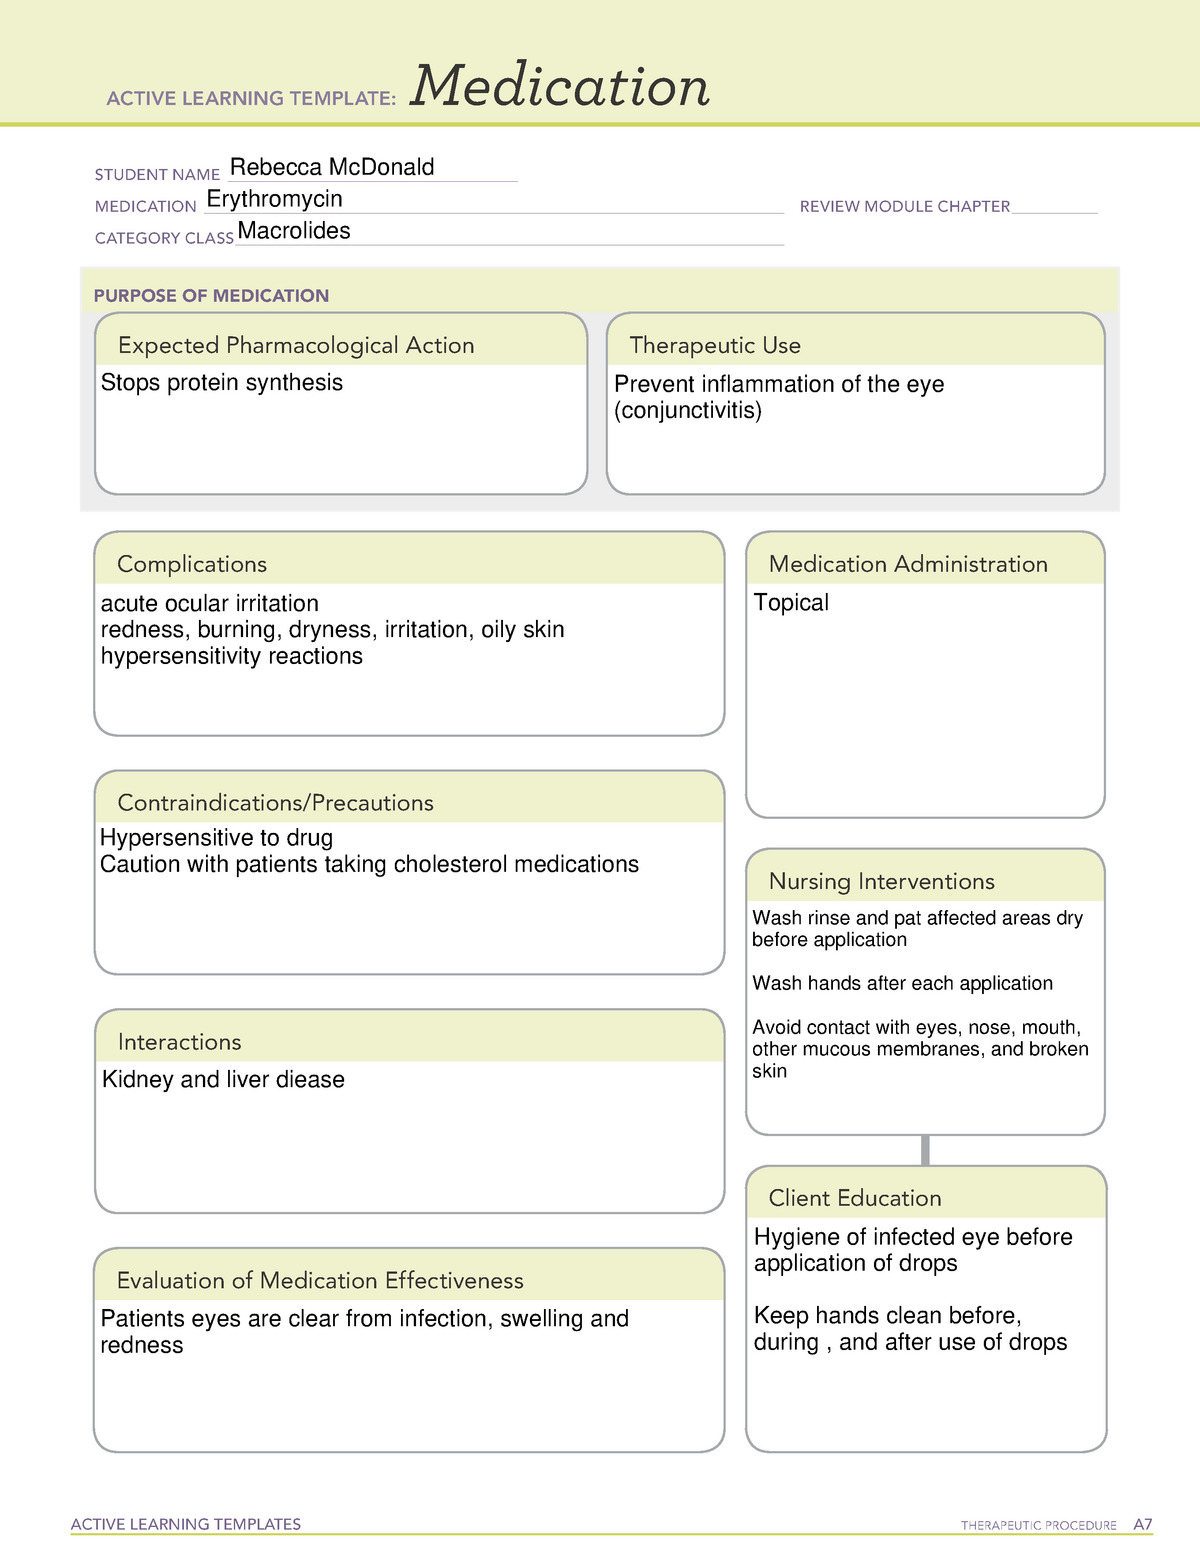 erythromycin-med-card-active-learning-templates-therapeutic-procedure